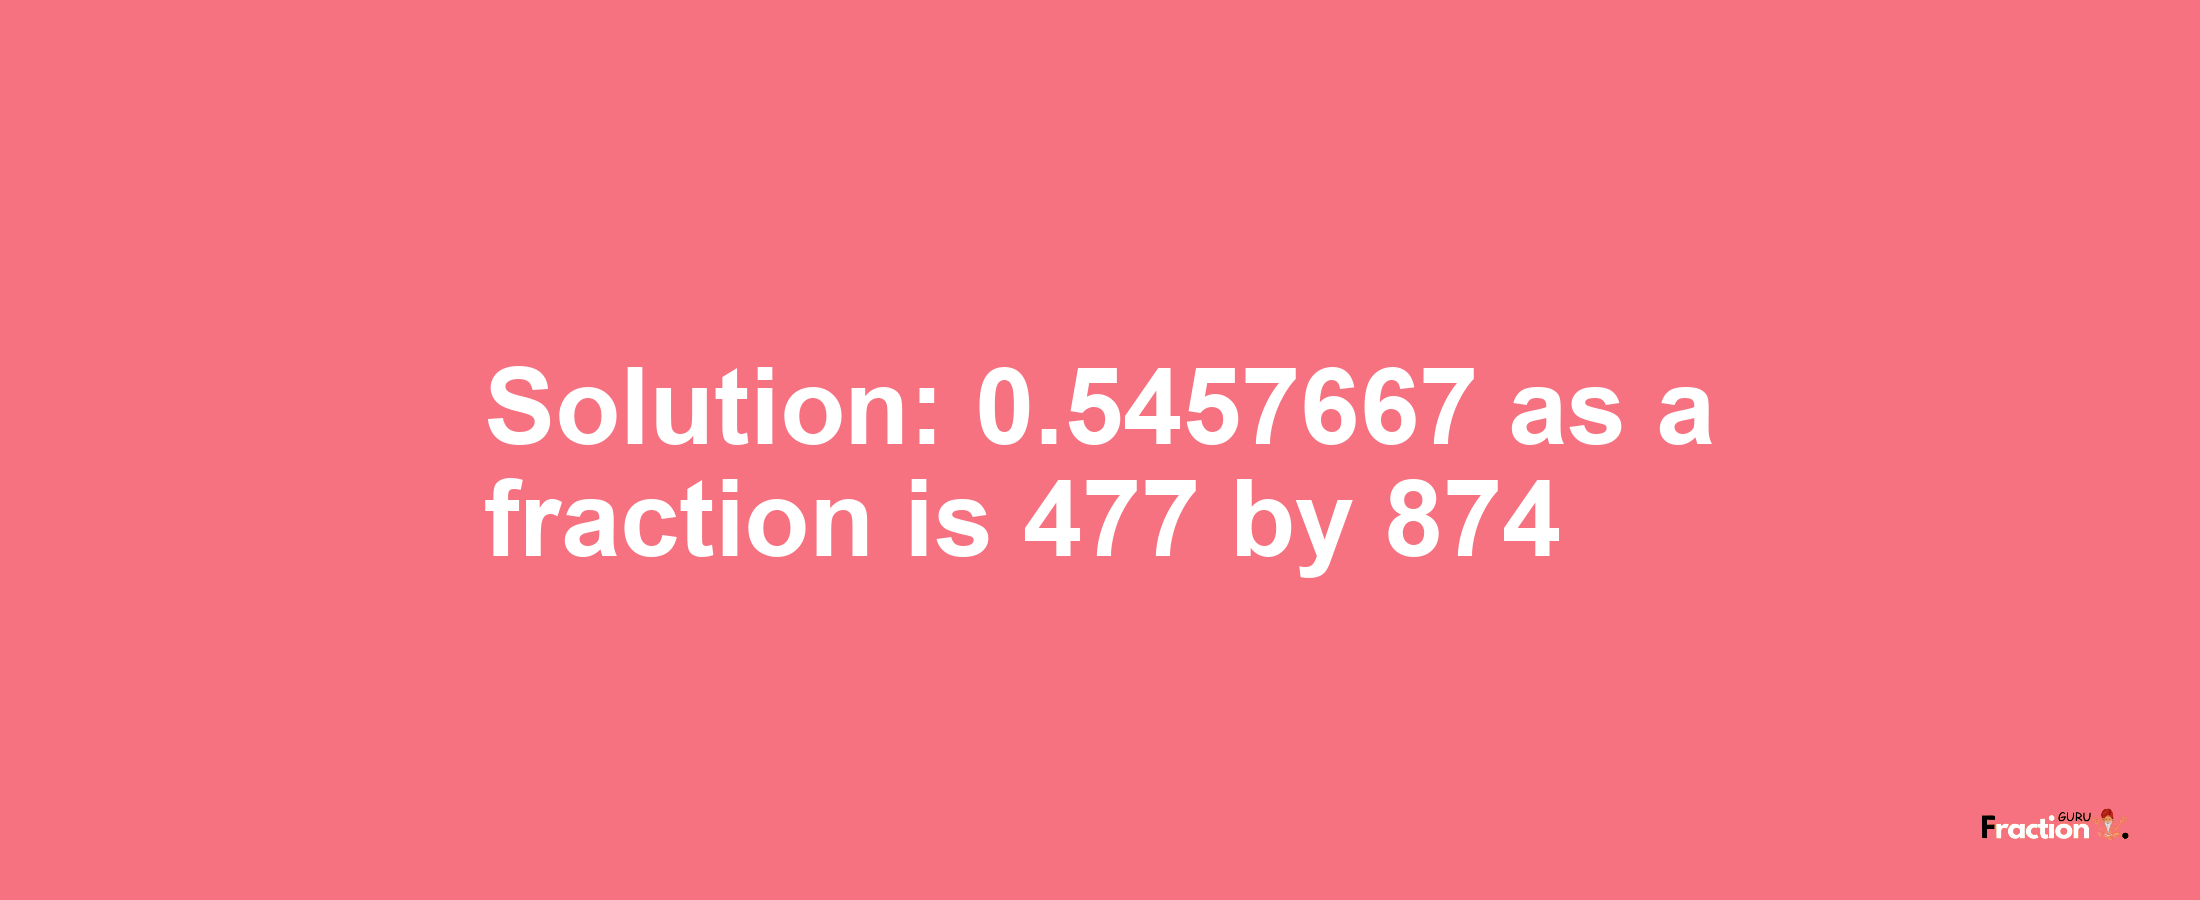 Solution:0.5457667 as a fraction is 477/874